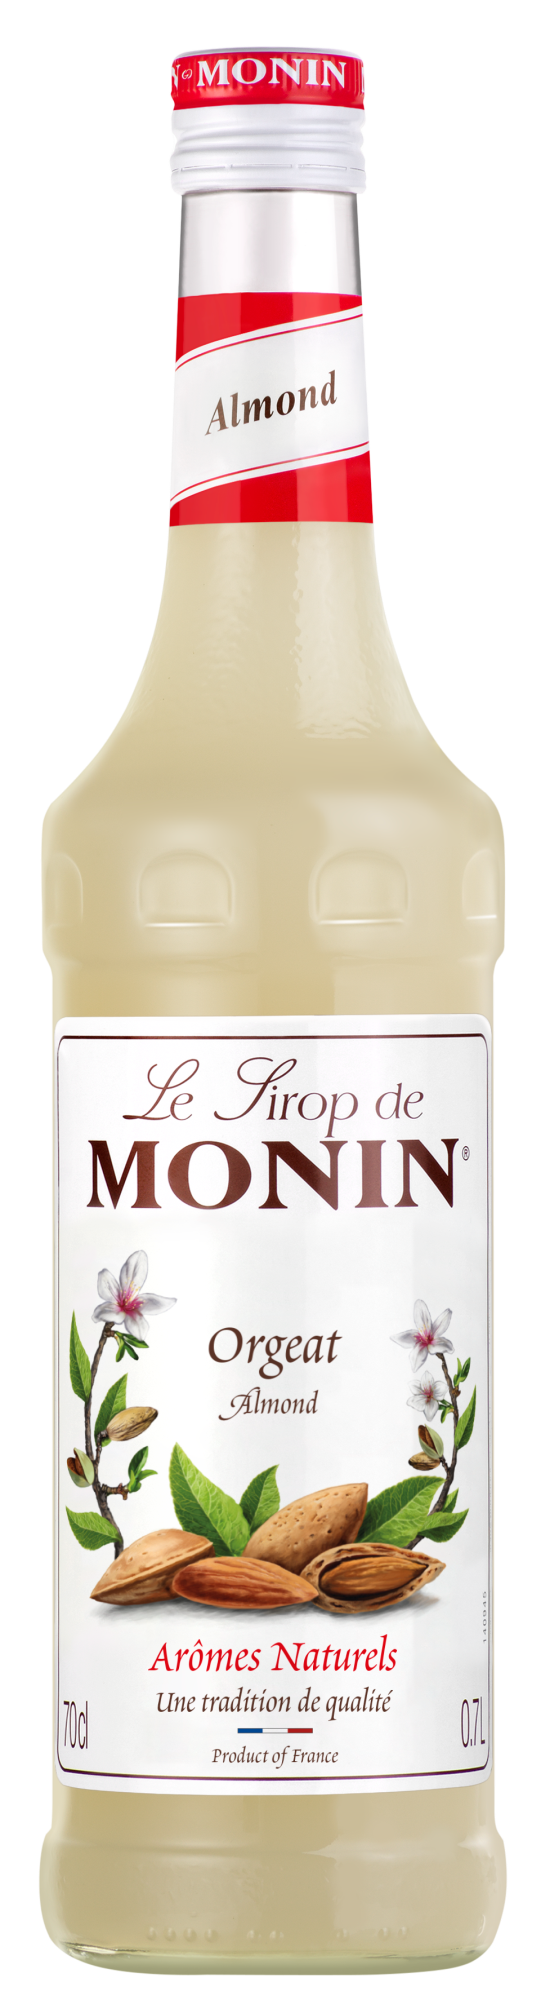 Buy MONIN Almond Orgeat Syrup. It has a rich, velvety, indulgent taste and aroma. It's used in cocktails and mocktails.